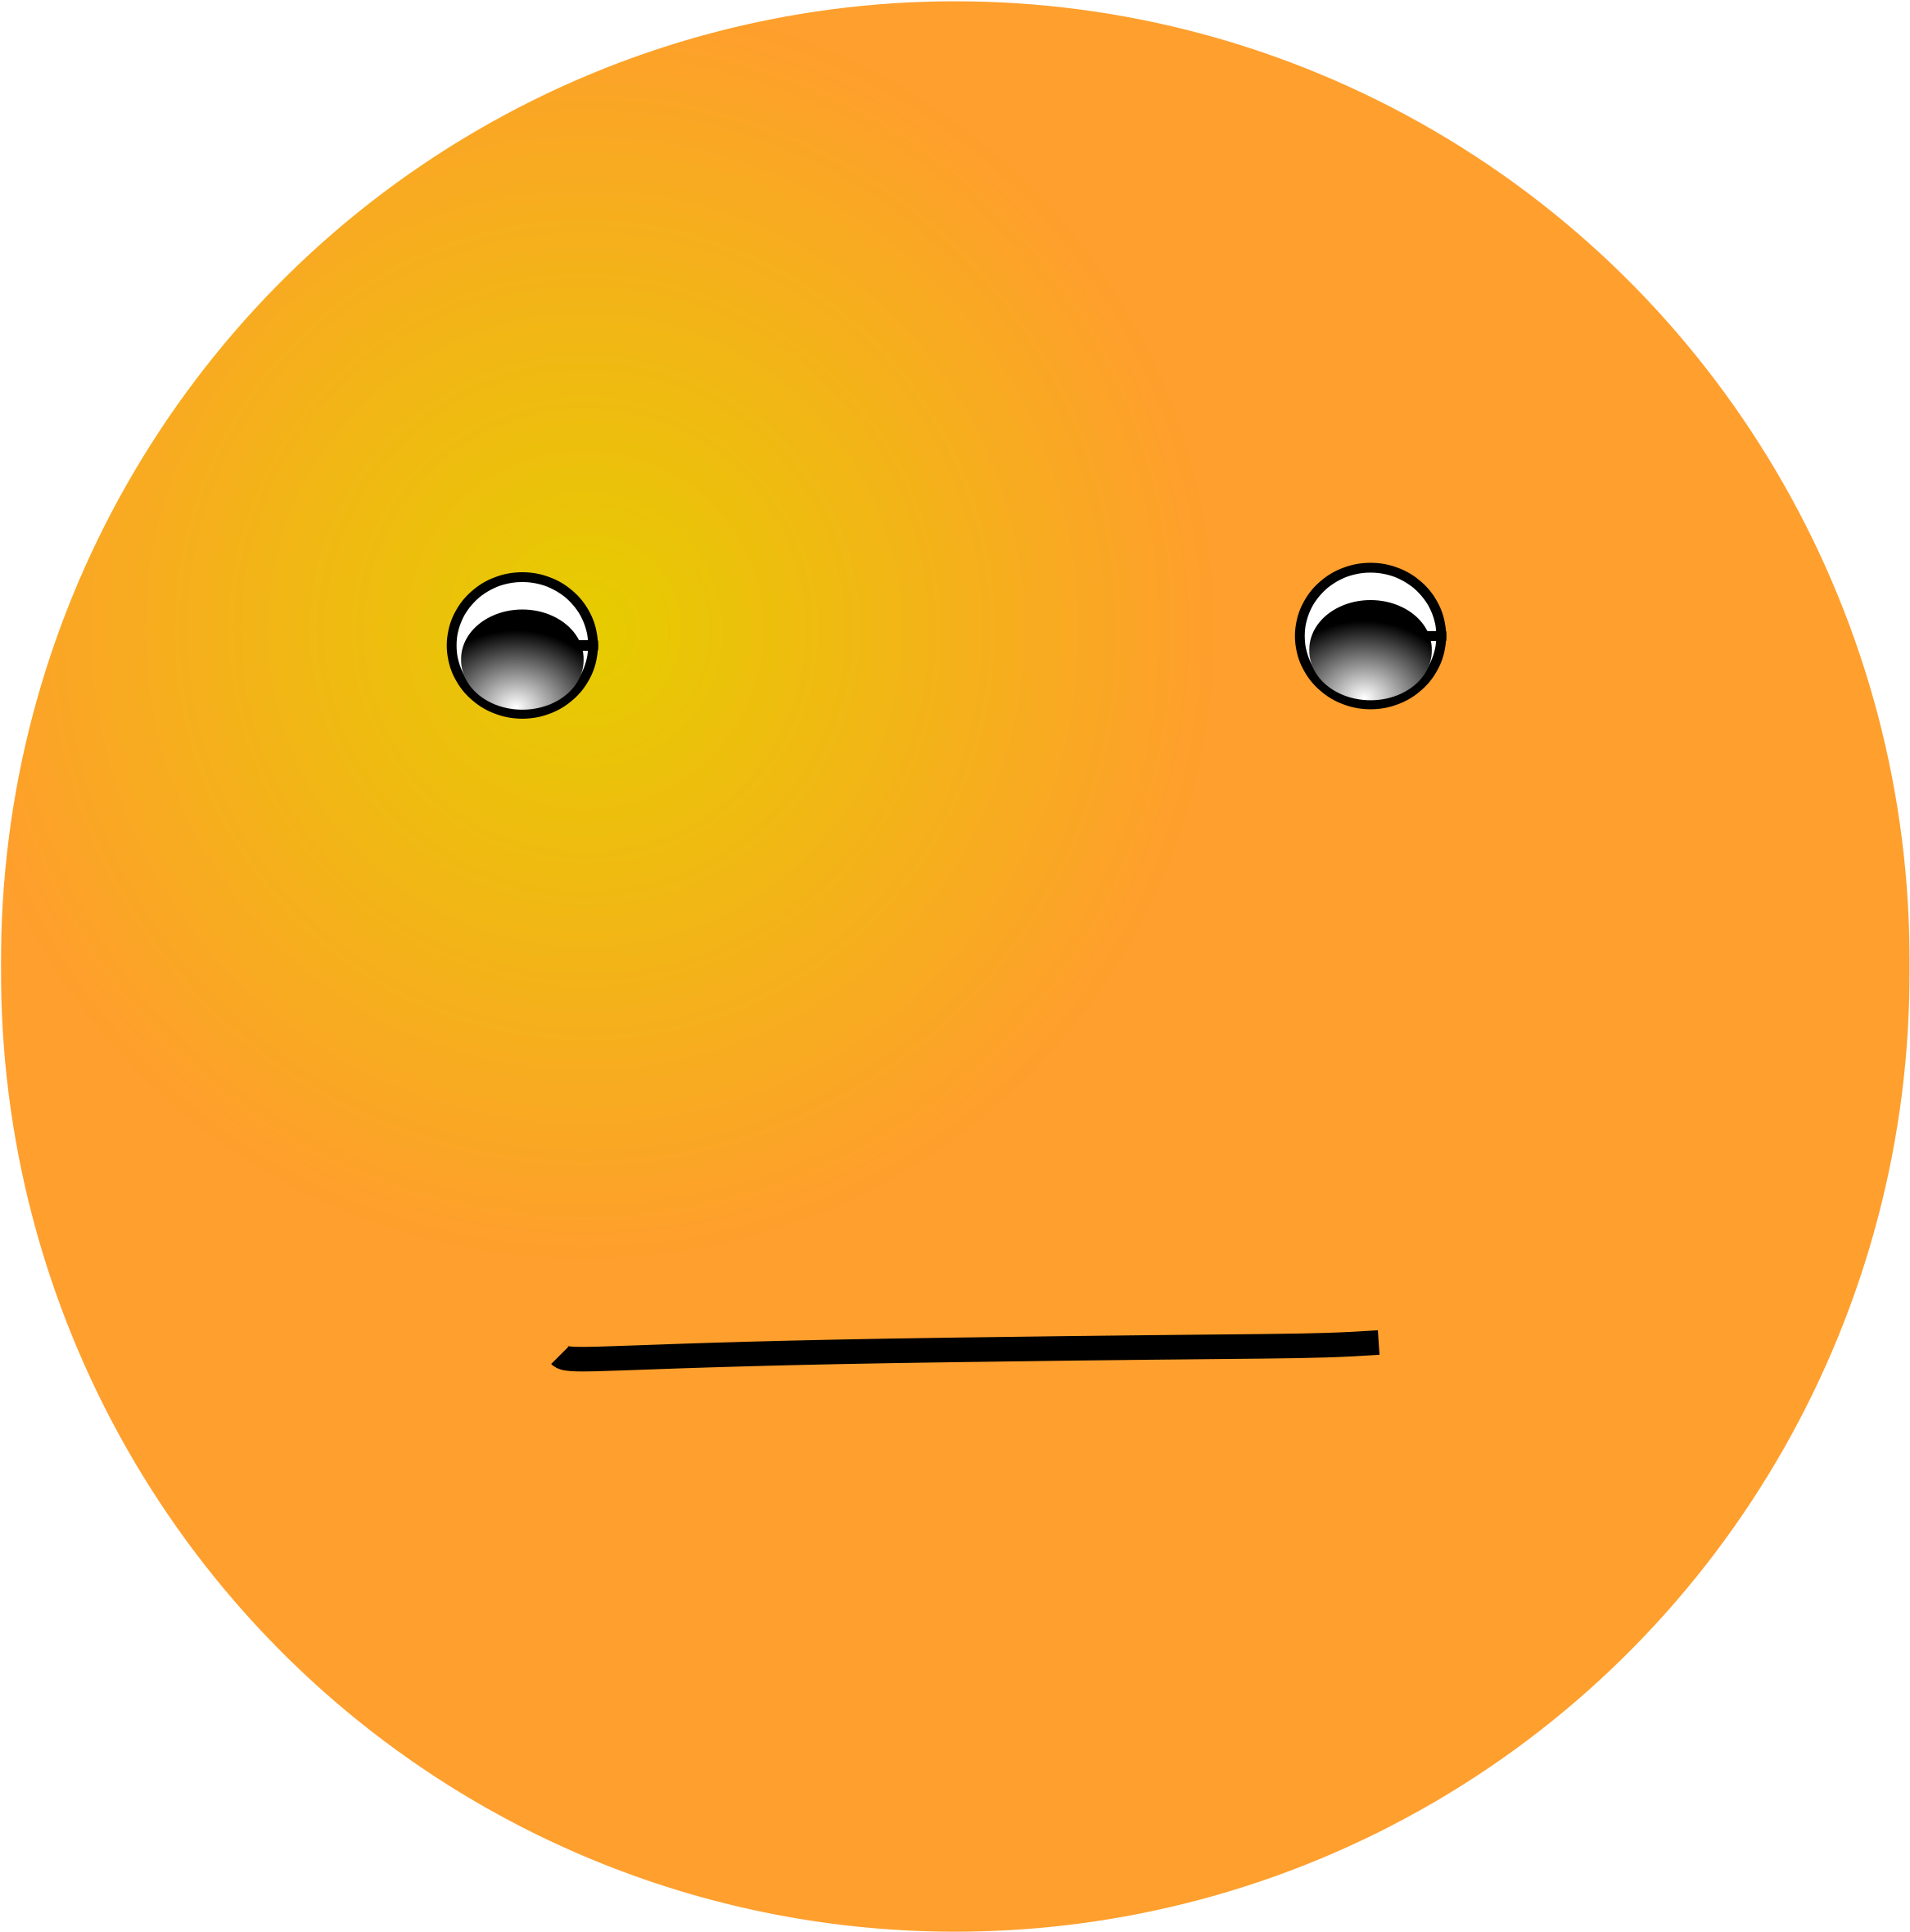 Question Face Puzzled Smiley Face Free Download Clip - Orange Smiley Face (2400x2400)